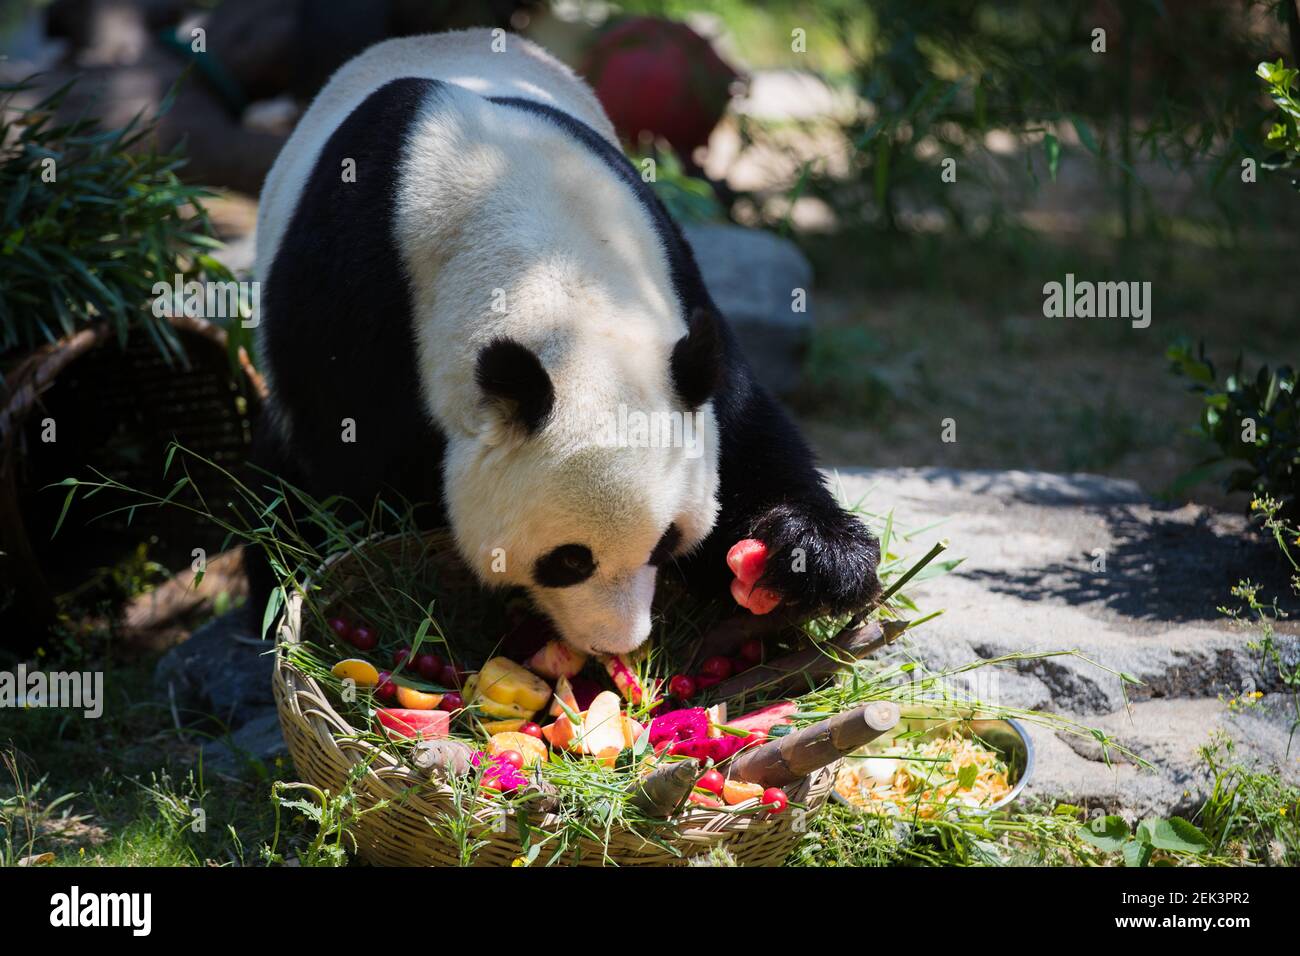 Panda Yaji is eating fruit prepared for his 6th birthday in Jinan Zoo in  Jinan city, east China's Shandong province, 26 May 2020. Jinan Zoo staff  made a fruit platter and a